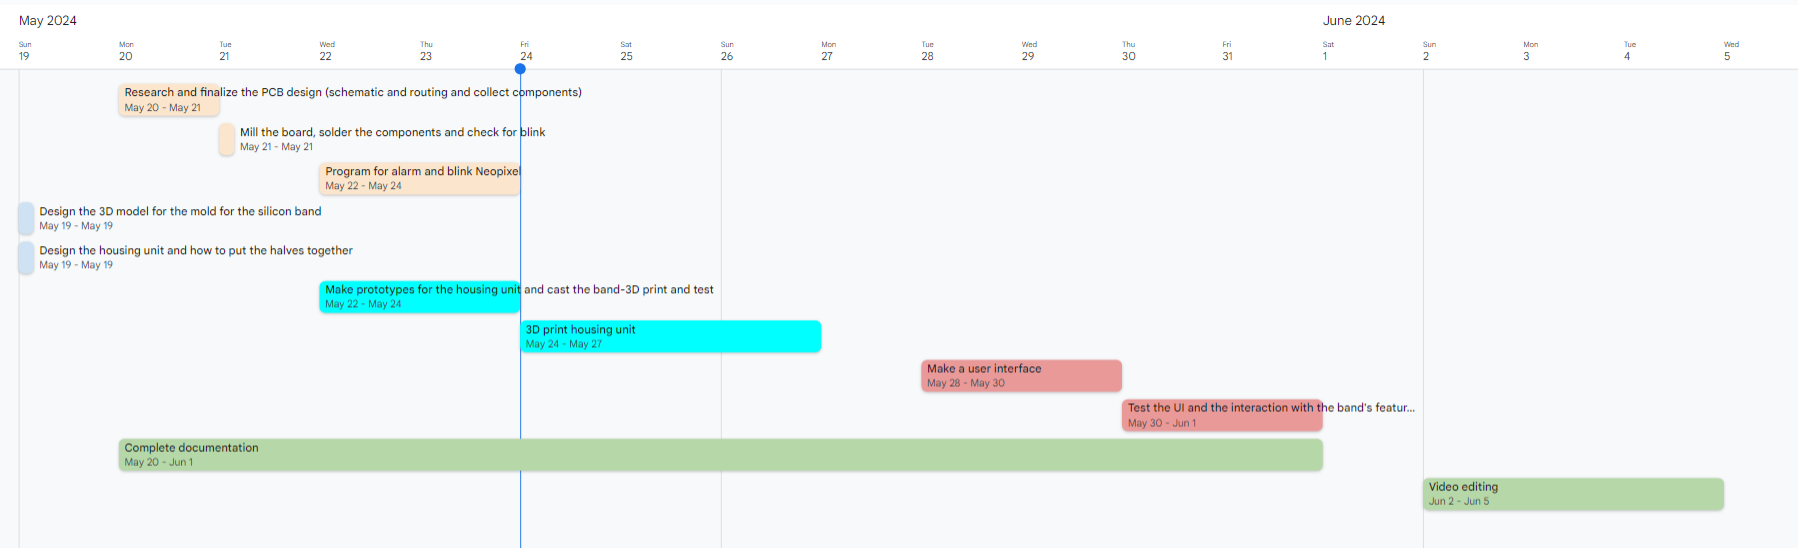 Project Schedule Timeline